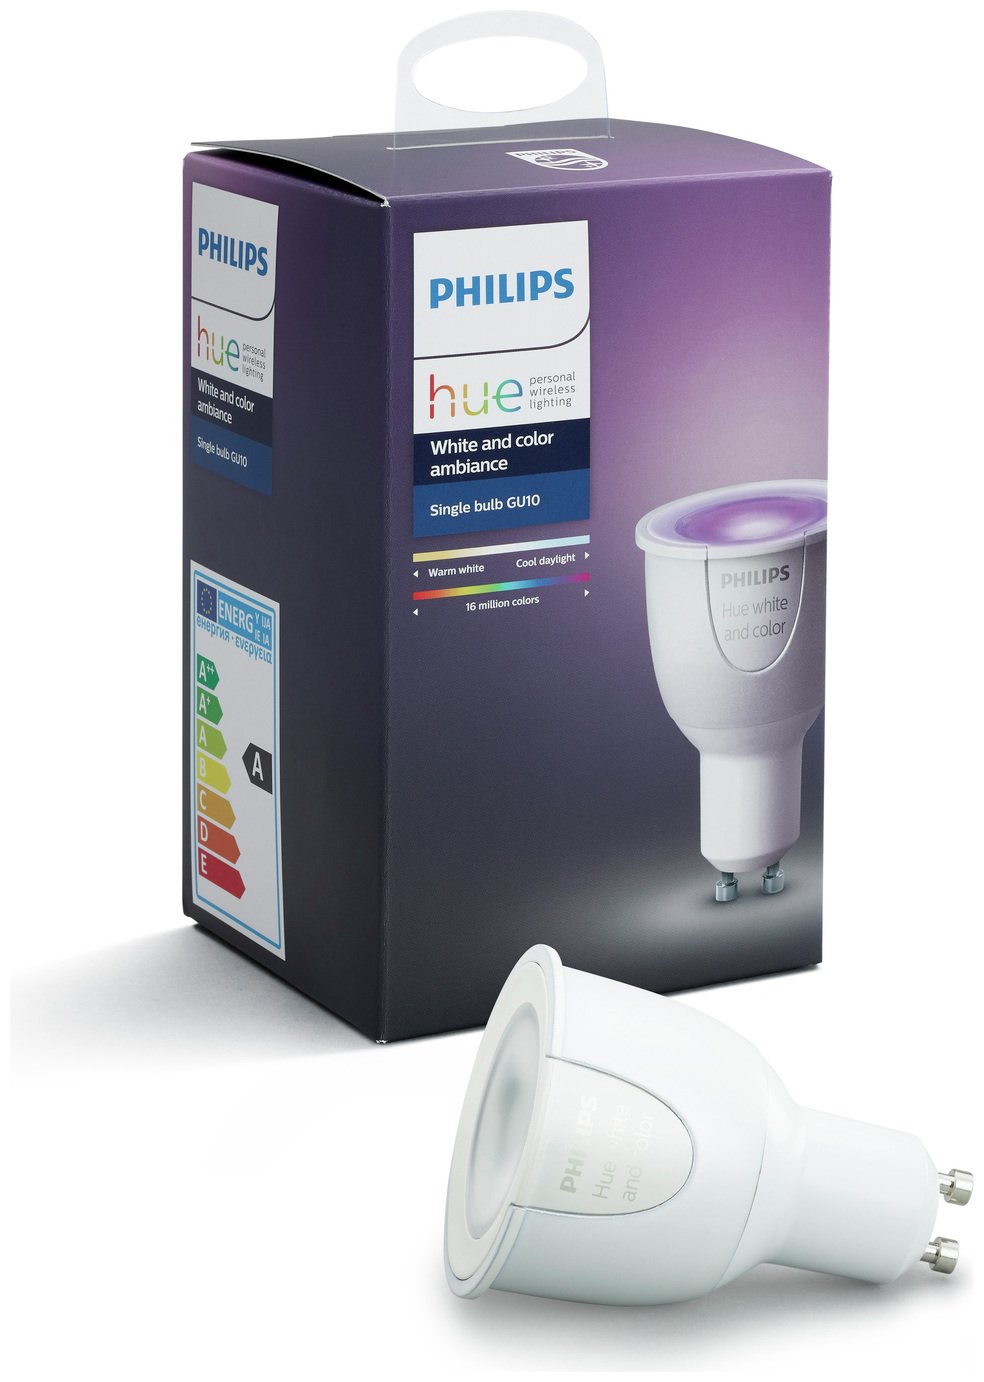 Philips Hue White and Colour Ambiance GU10 Single Bulb. Review